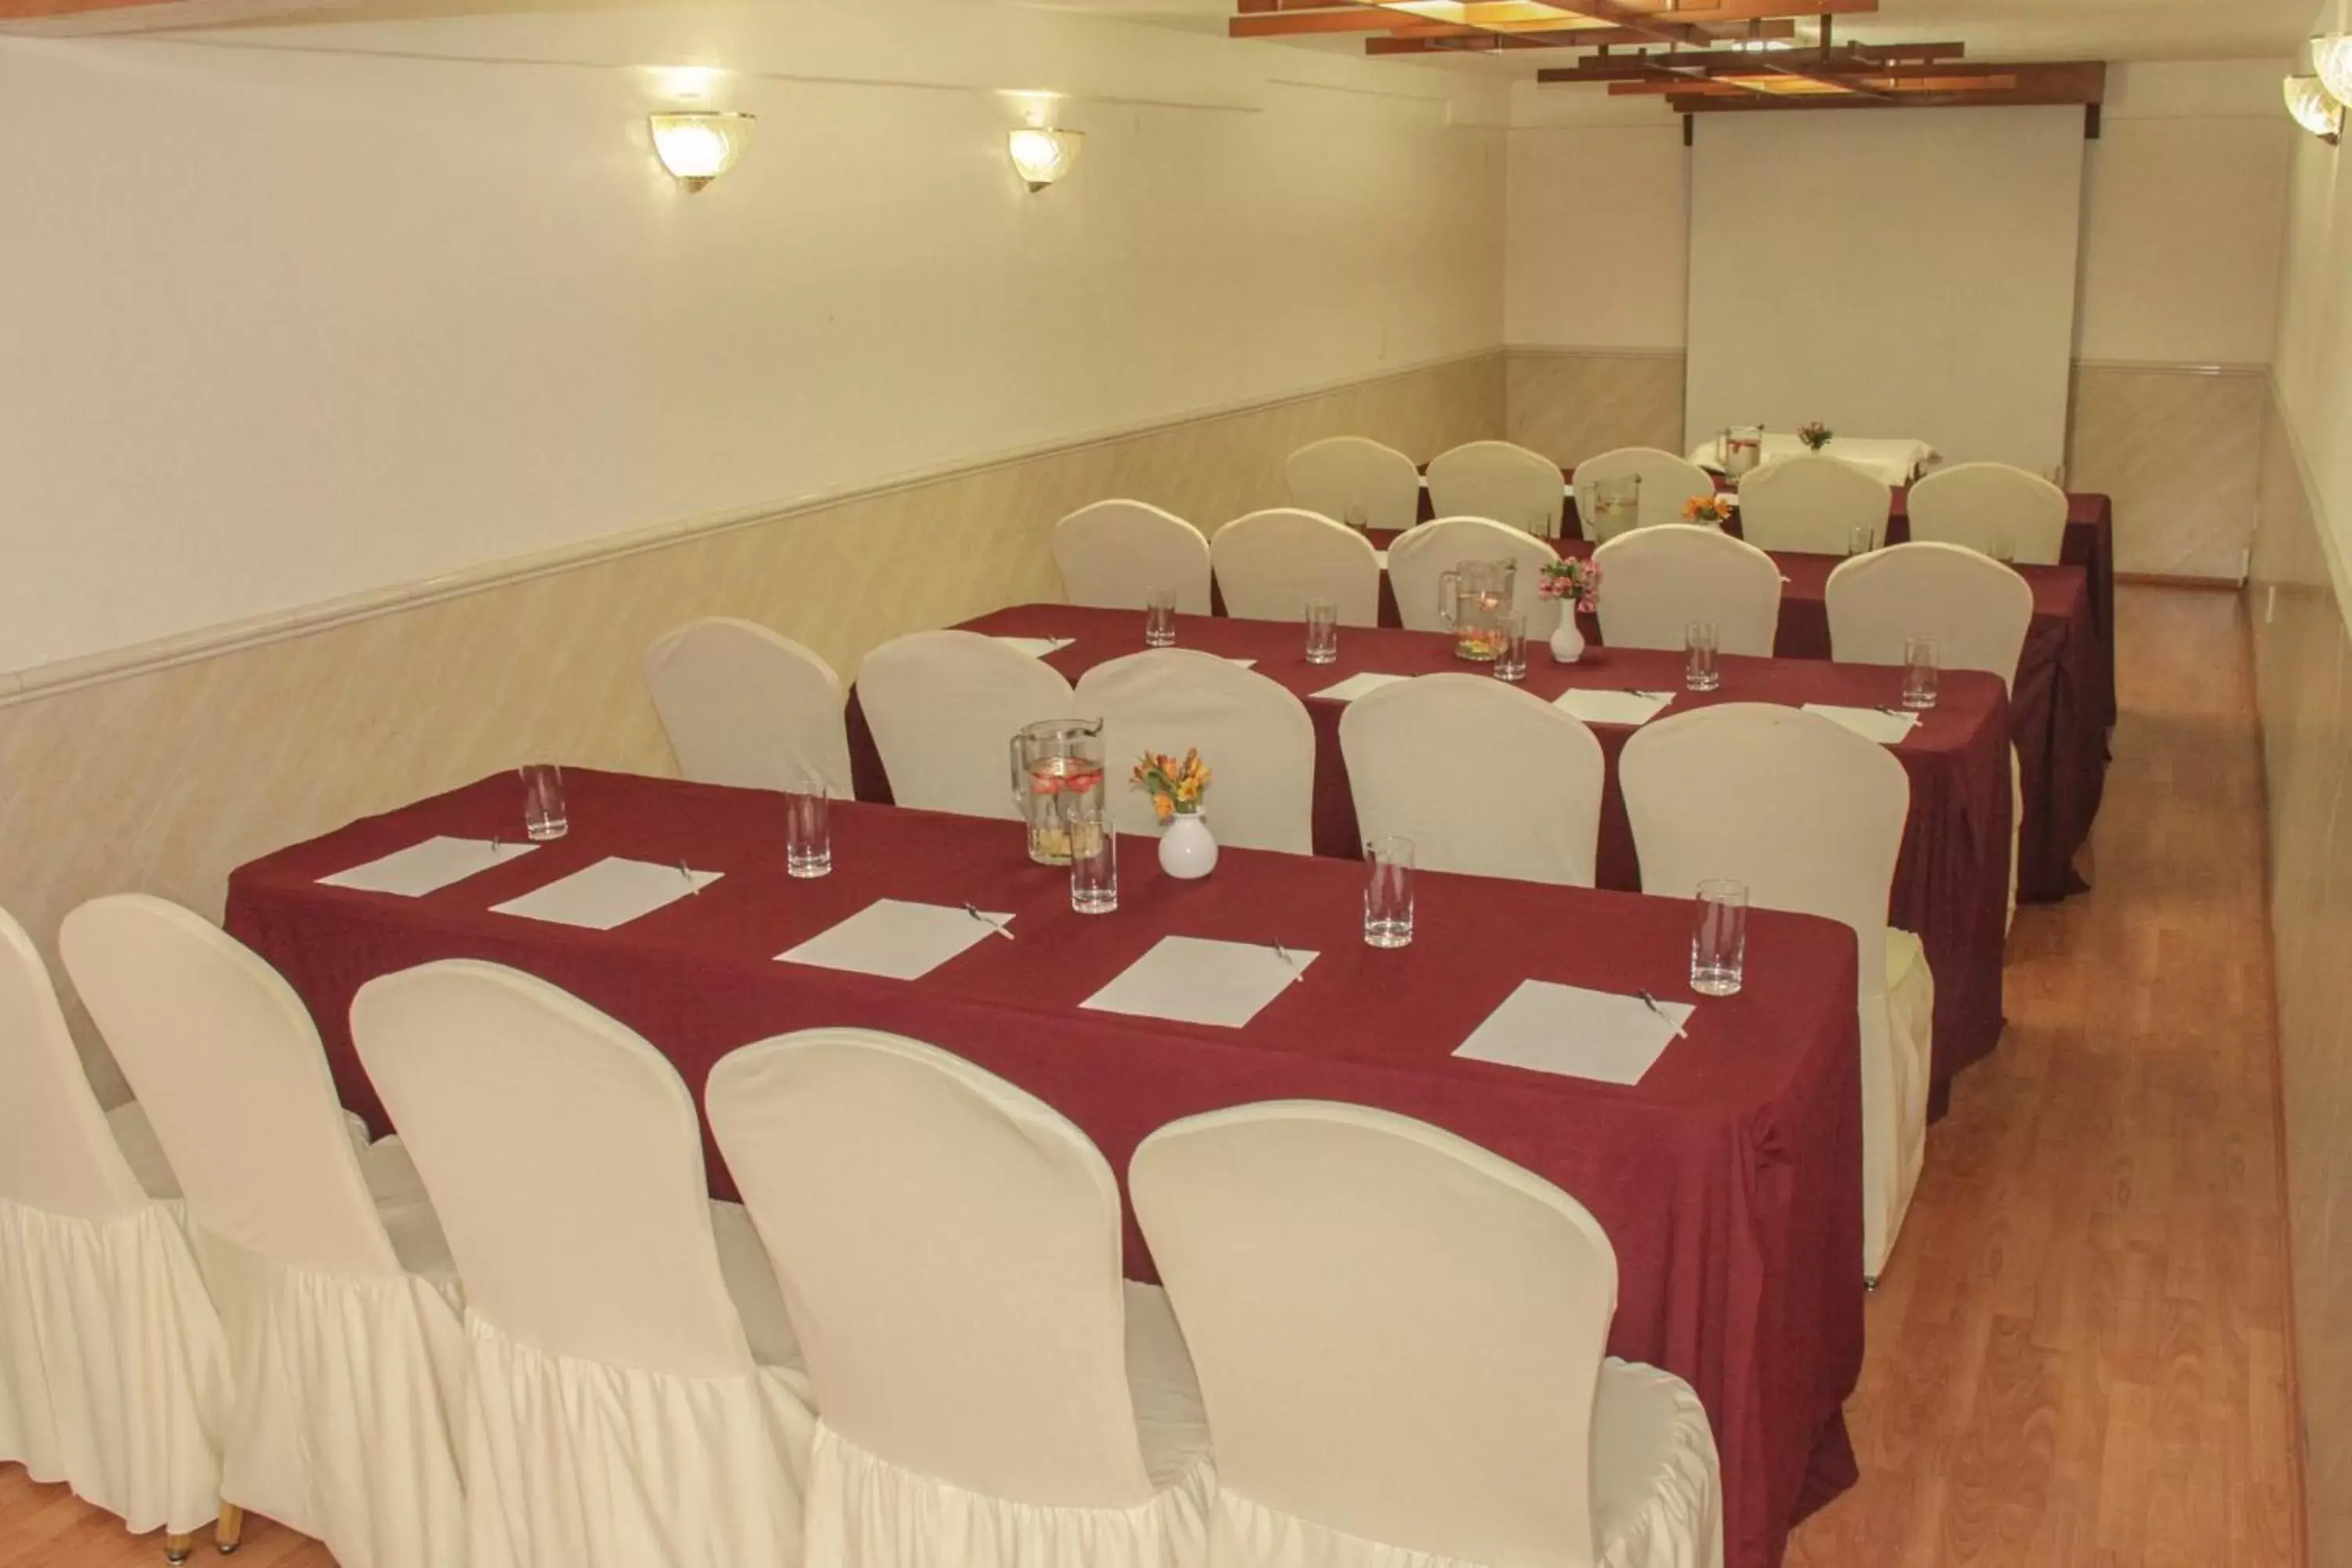 Meeting/conference room, Banquet Facilities in Radisson Hotel & Convention Center Toluca